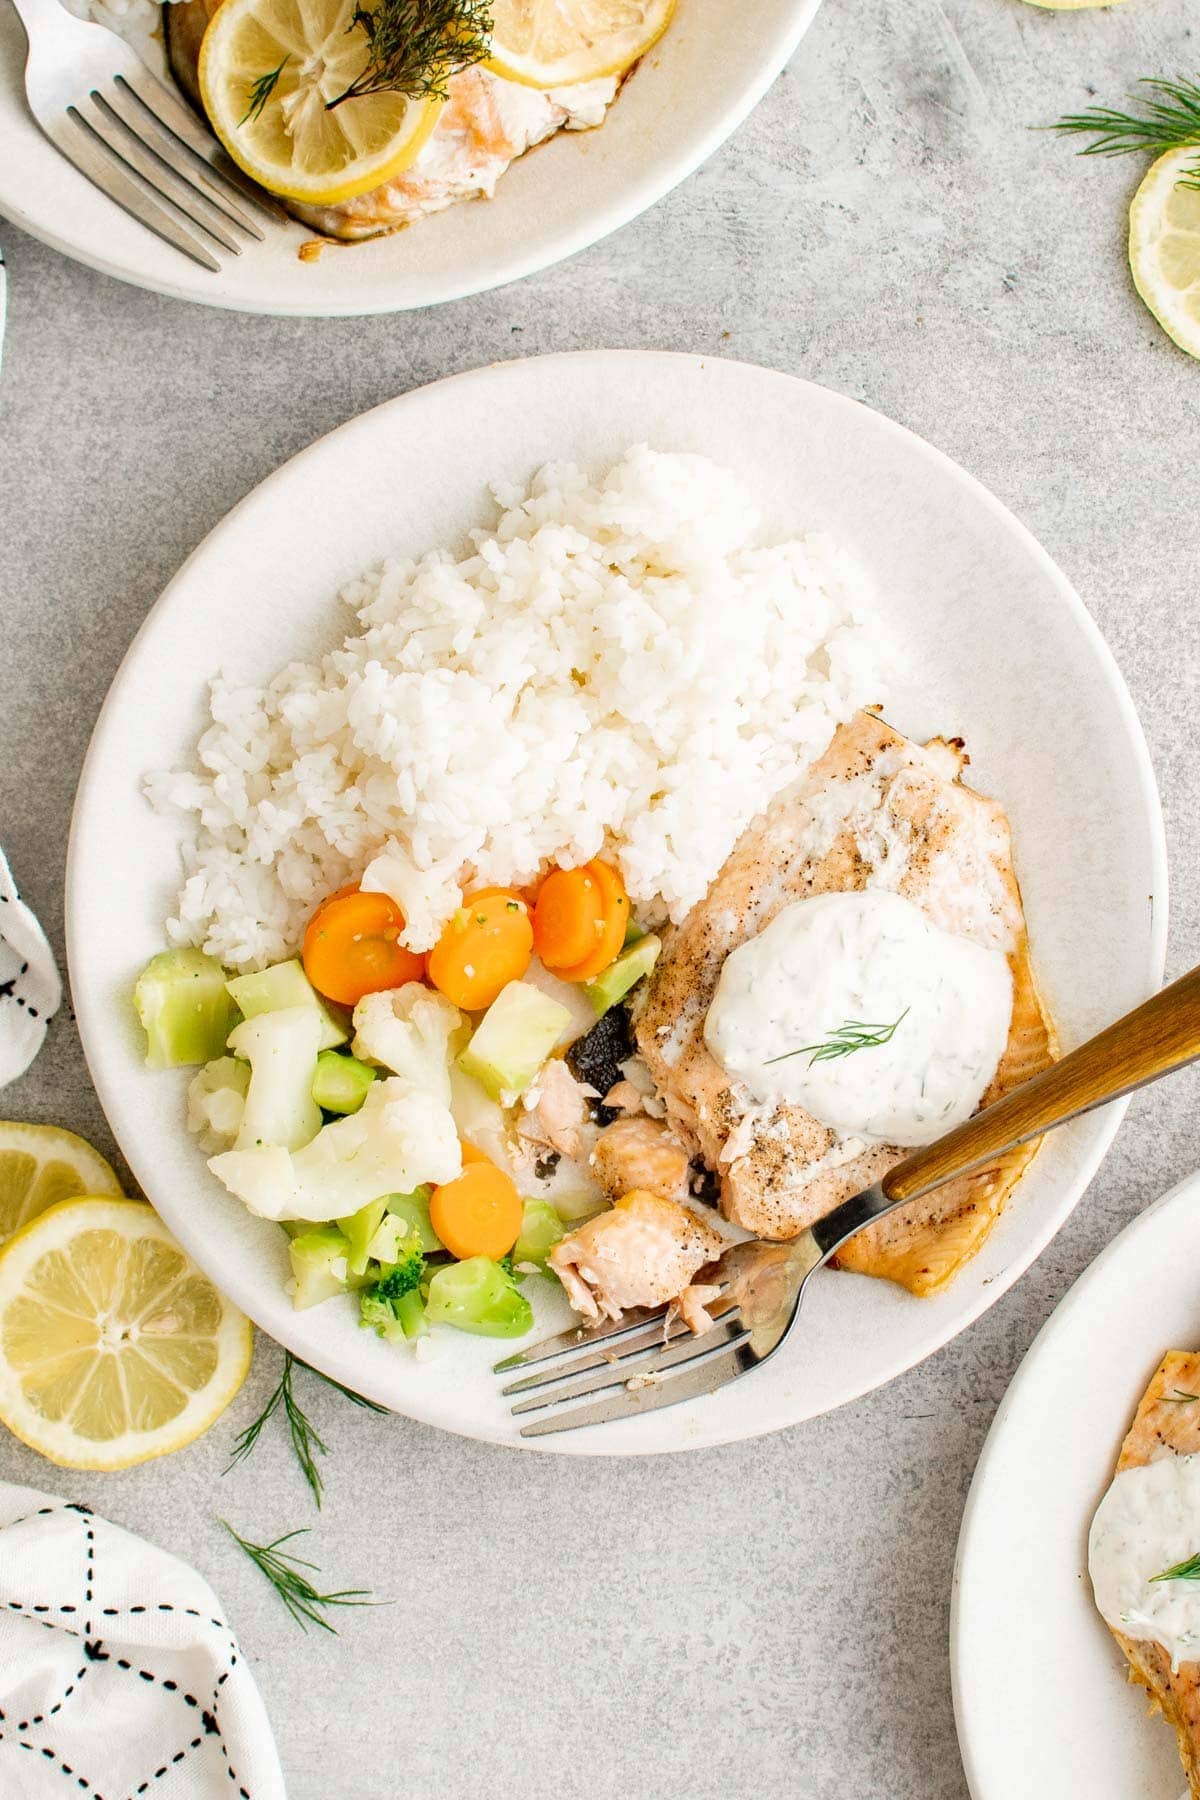 A piece of salmon with creamy dill sauce, rice and vegetables on a white plate, with a fork.  